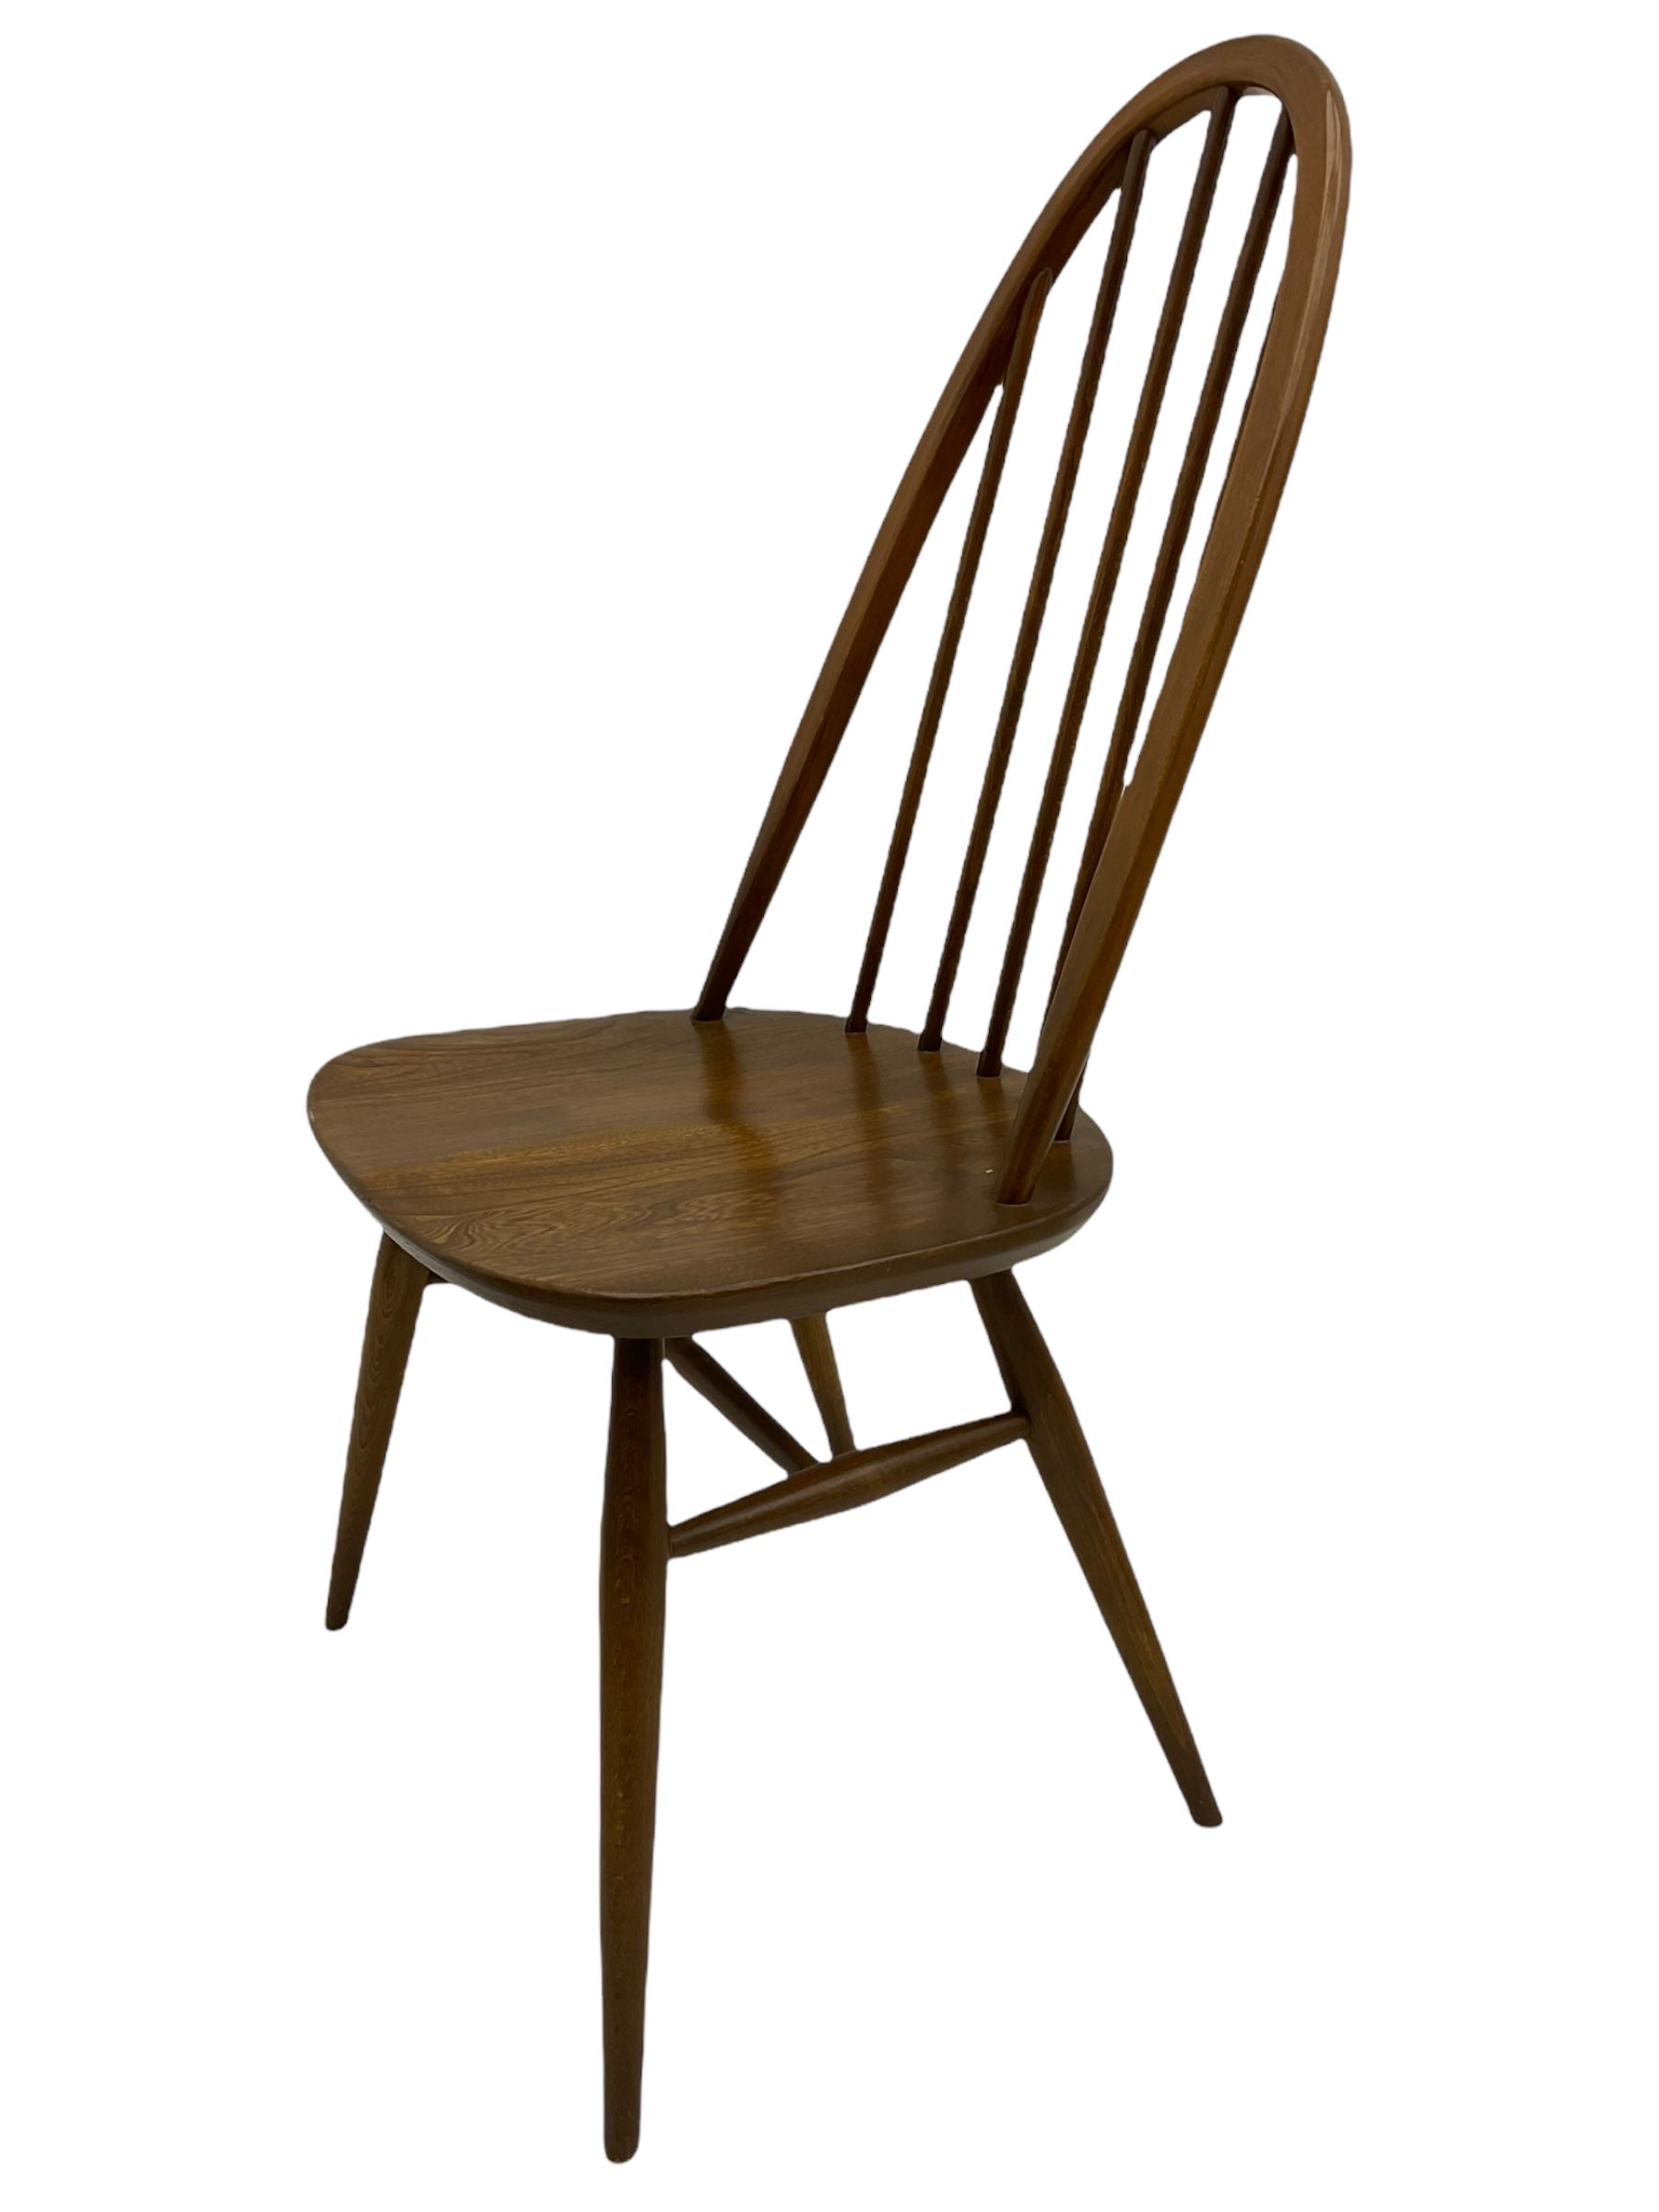 Four Ercol medium elm and beech chairs - Image 7 of 8